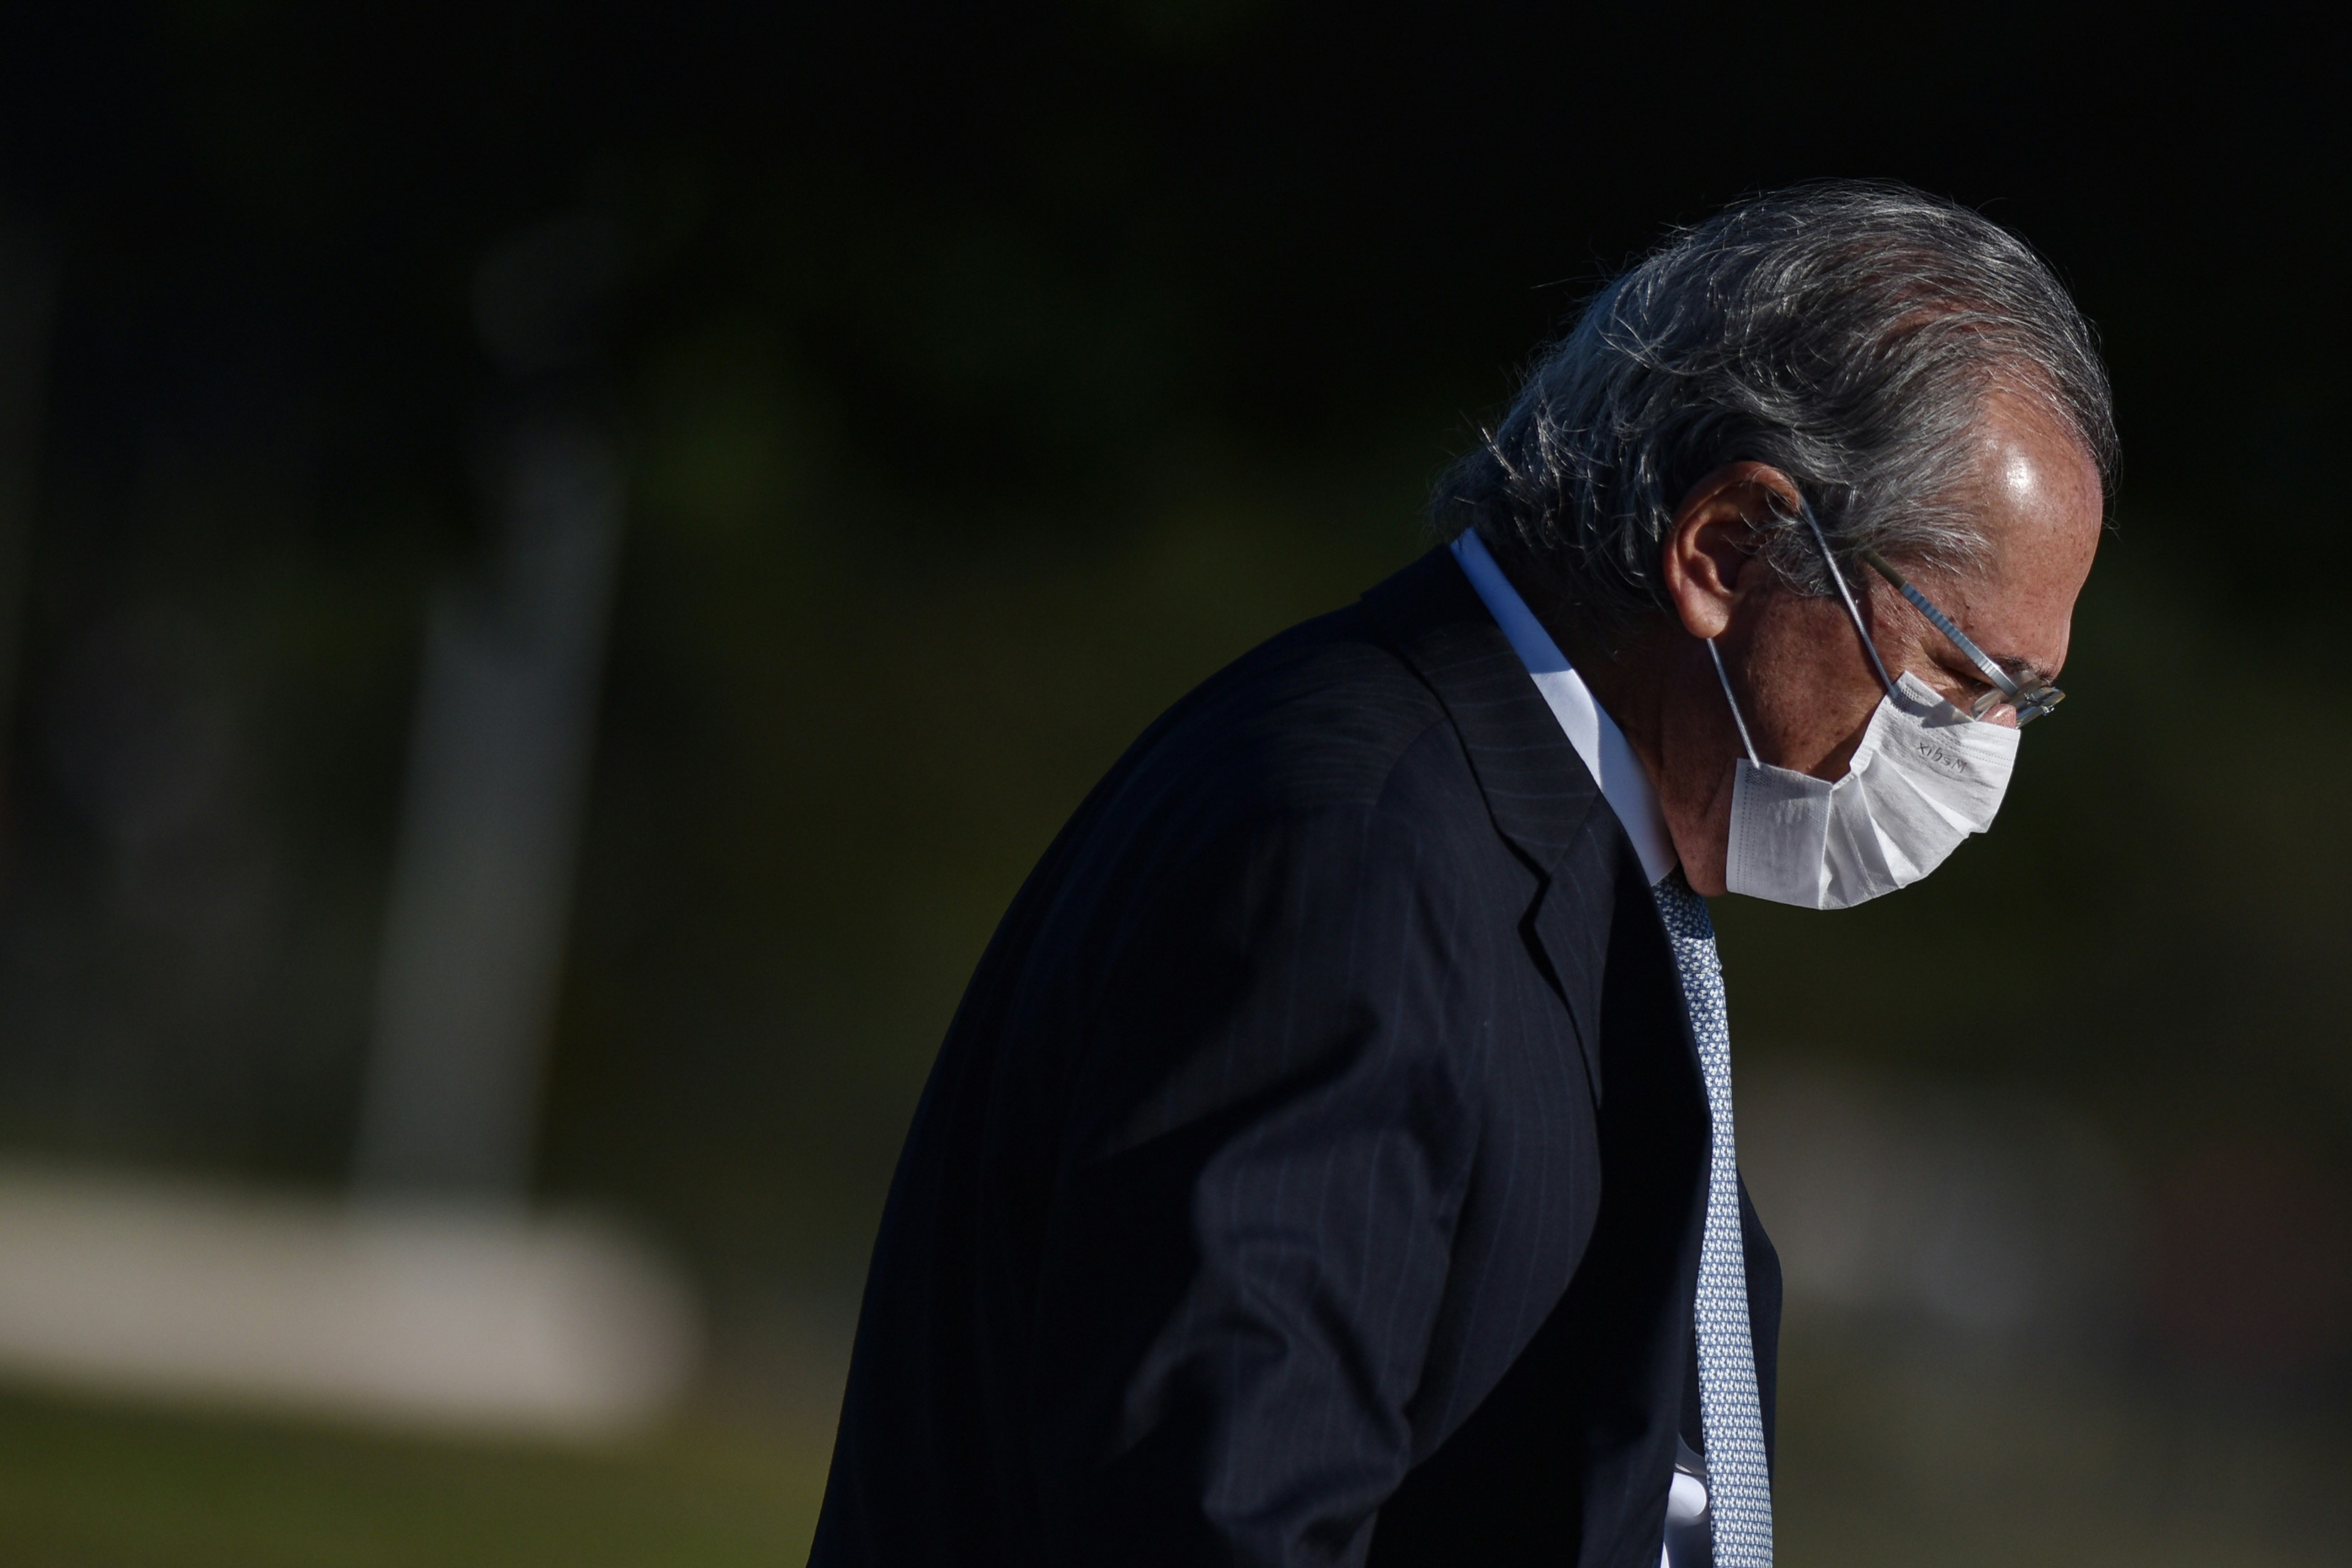 Paulo Guedes, Brazil's economy minister, wears a protective mask during the National Flag Raising ceremony at Alvorada Palace in Brasilia, Brazil, on Tuesday, May 12, 2020.